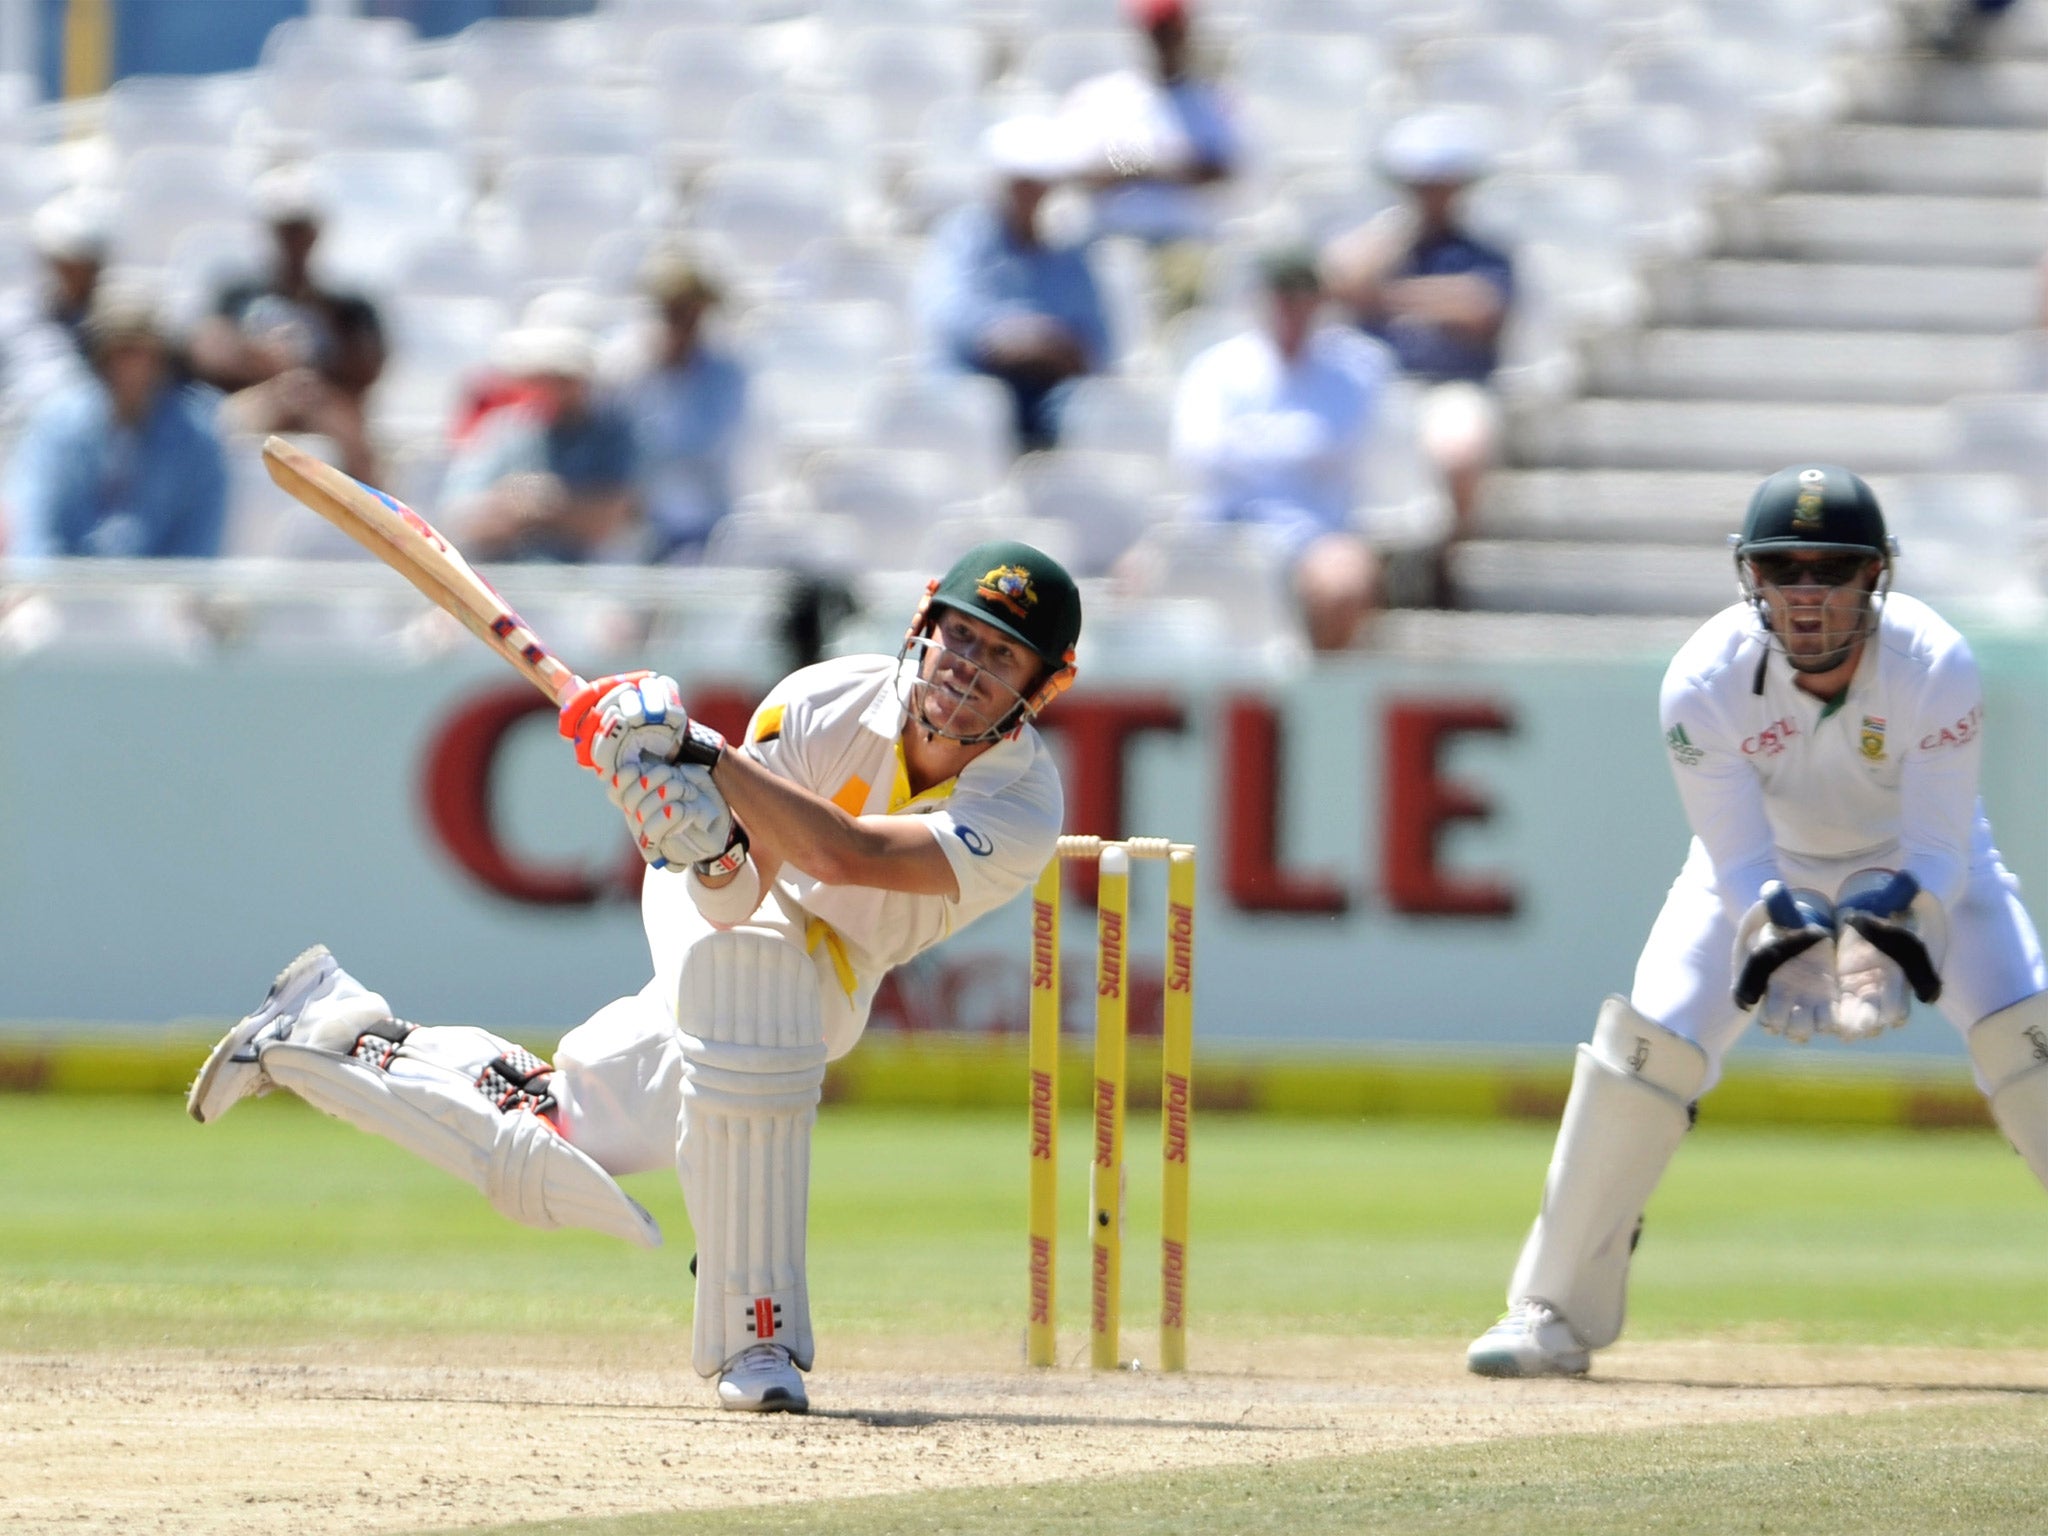 David Warner hit 145 yesterday, his second century of the match, as Australia set a huge target of 511